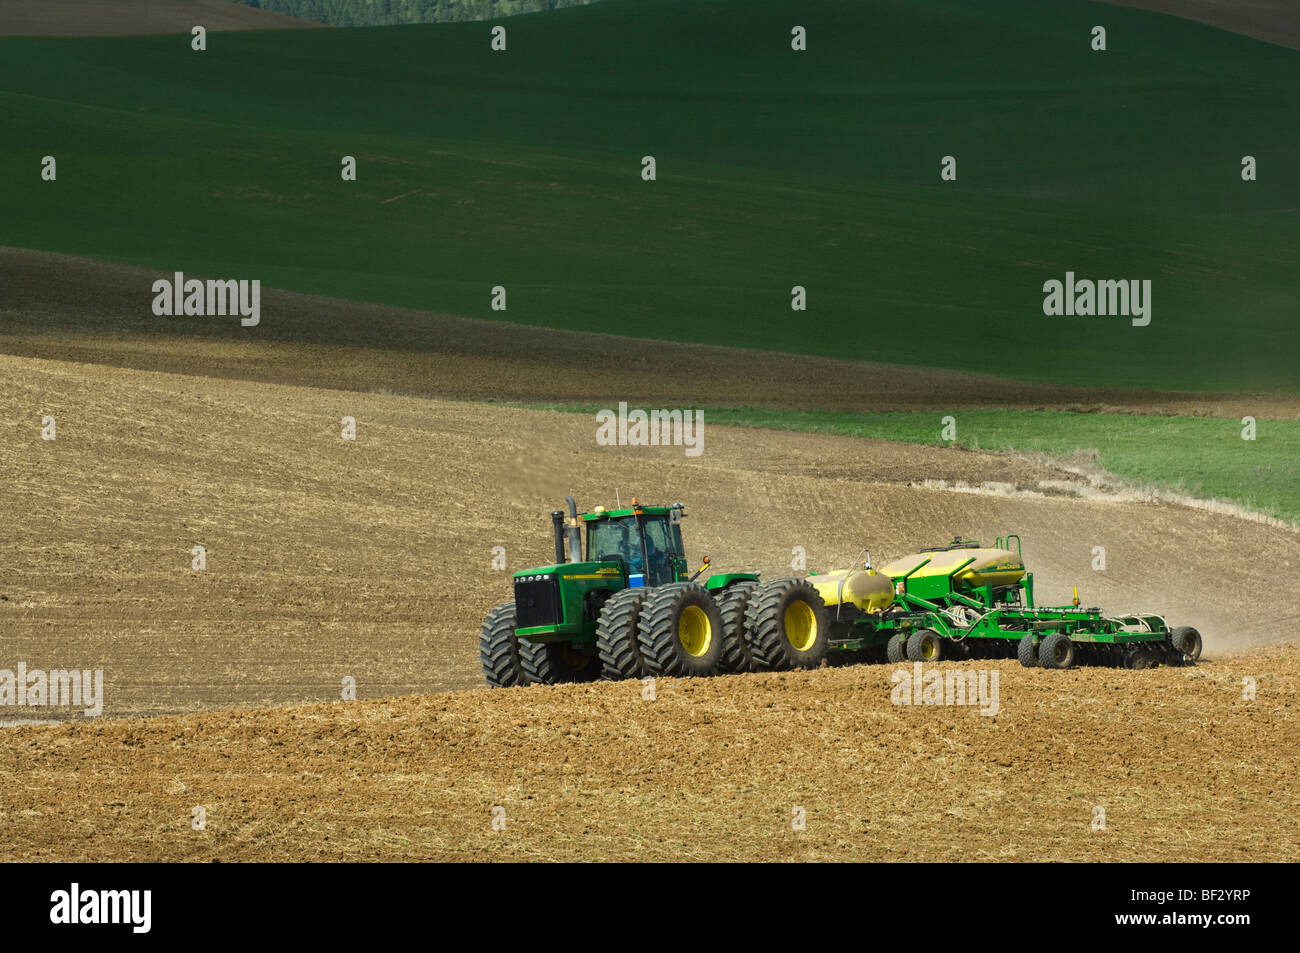 A John Deere tractor and air seeder planting garbanzo beans (chick peas ...